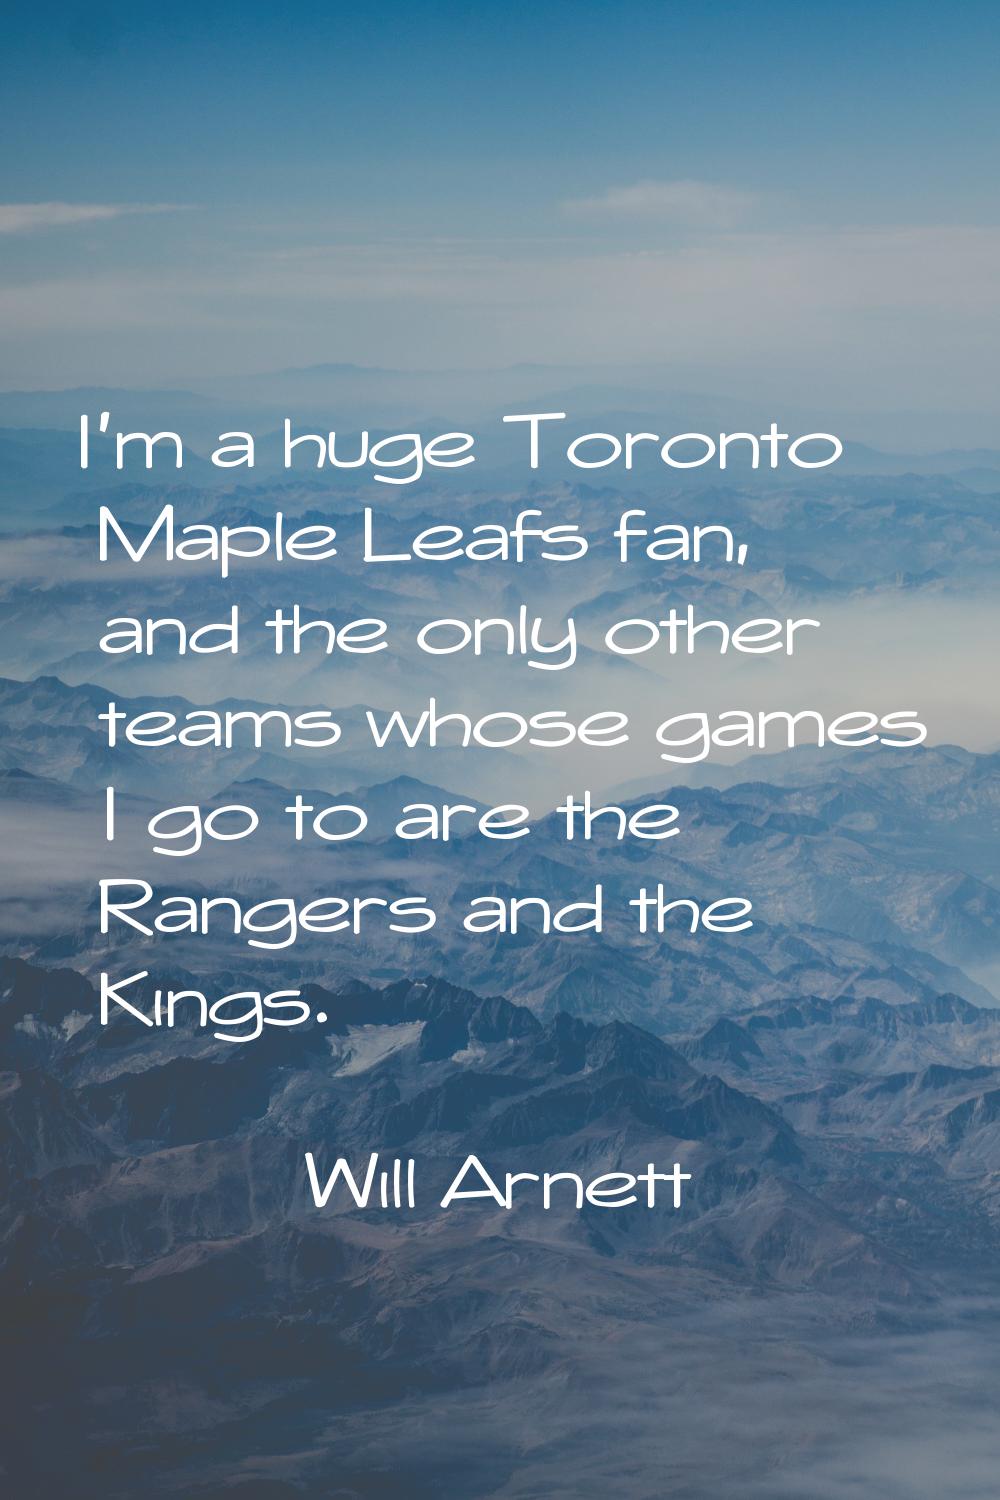 I'm a huge Toronto Maple Leafs fan, and the only other teams whose games I go to are the Rangers an